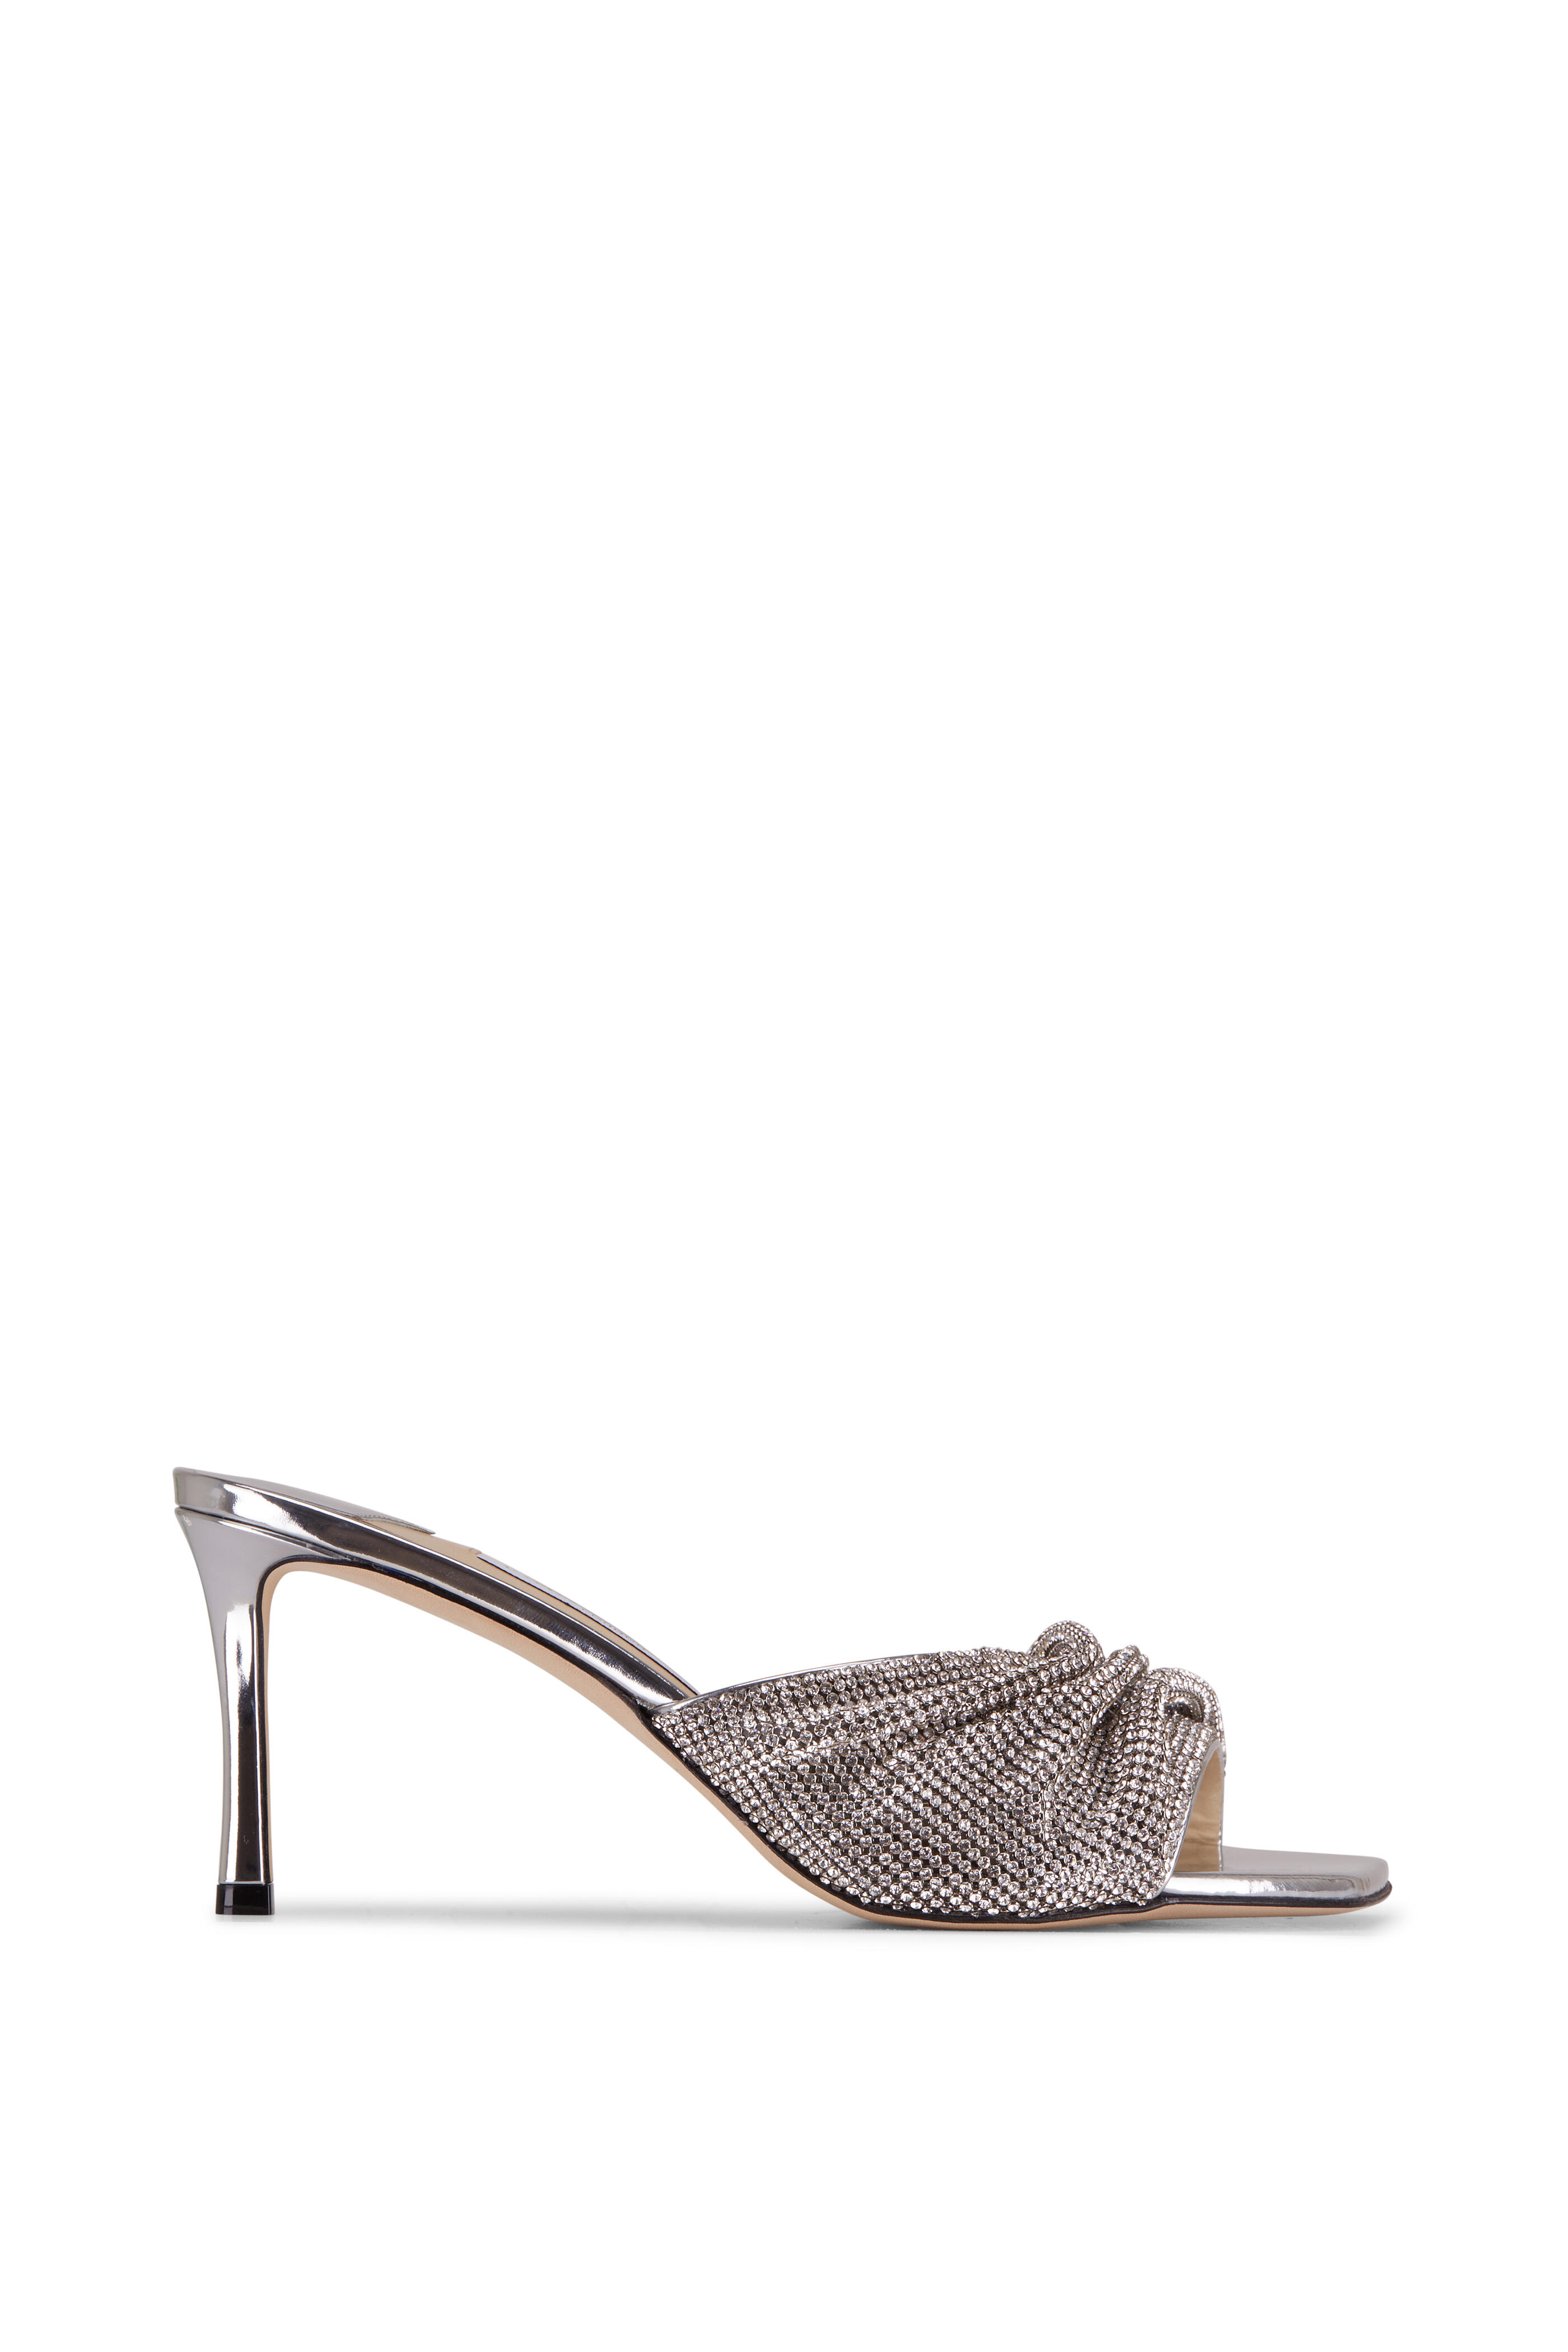 Jimmy Choo - Naria Crystal Mesh Mule, 75mm | Mitchell Stores